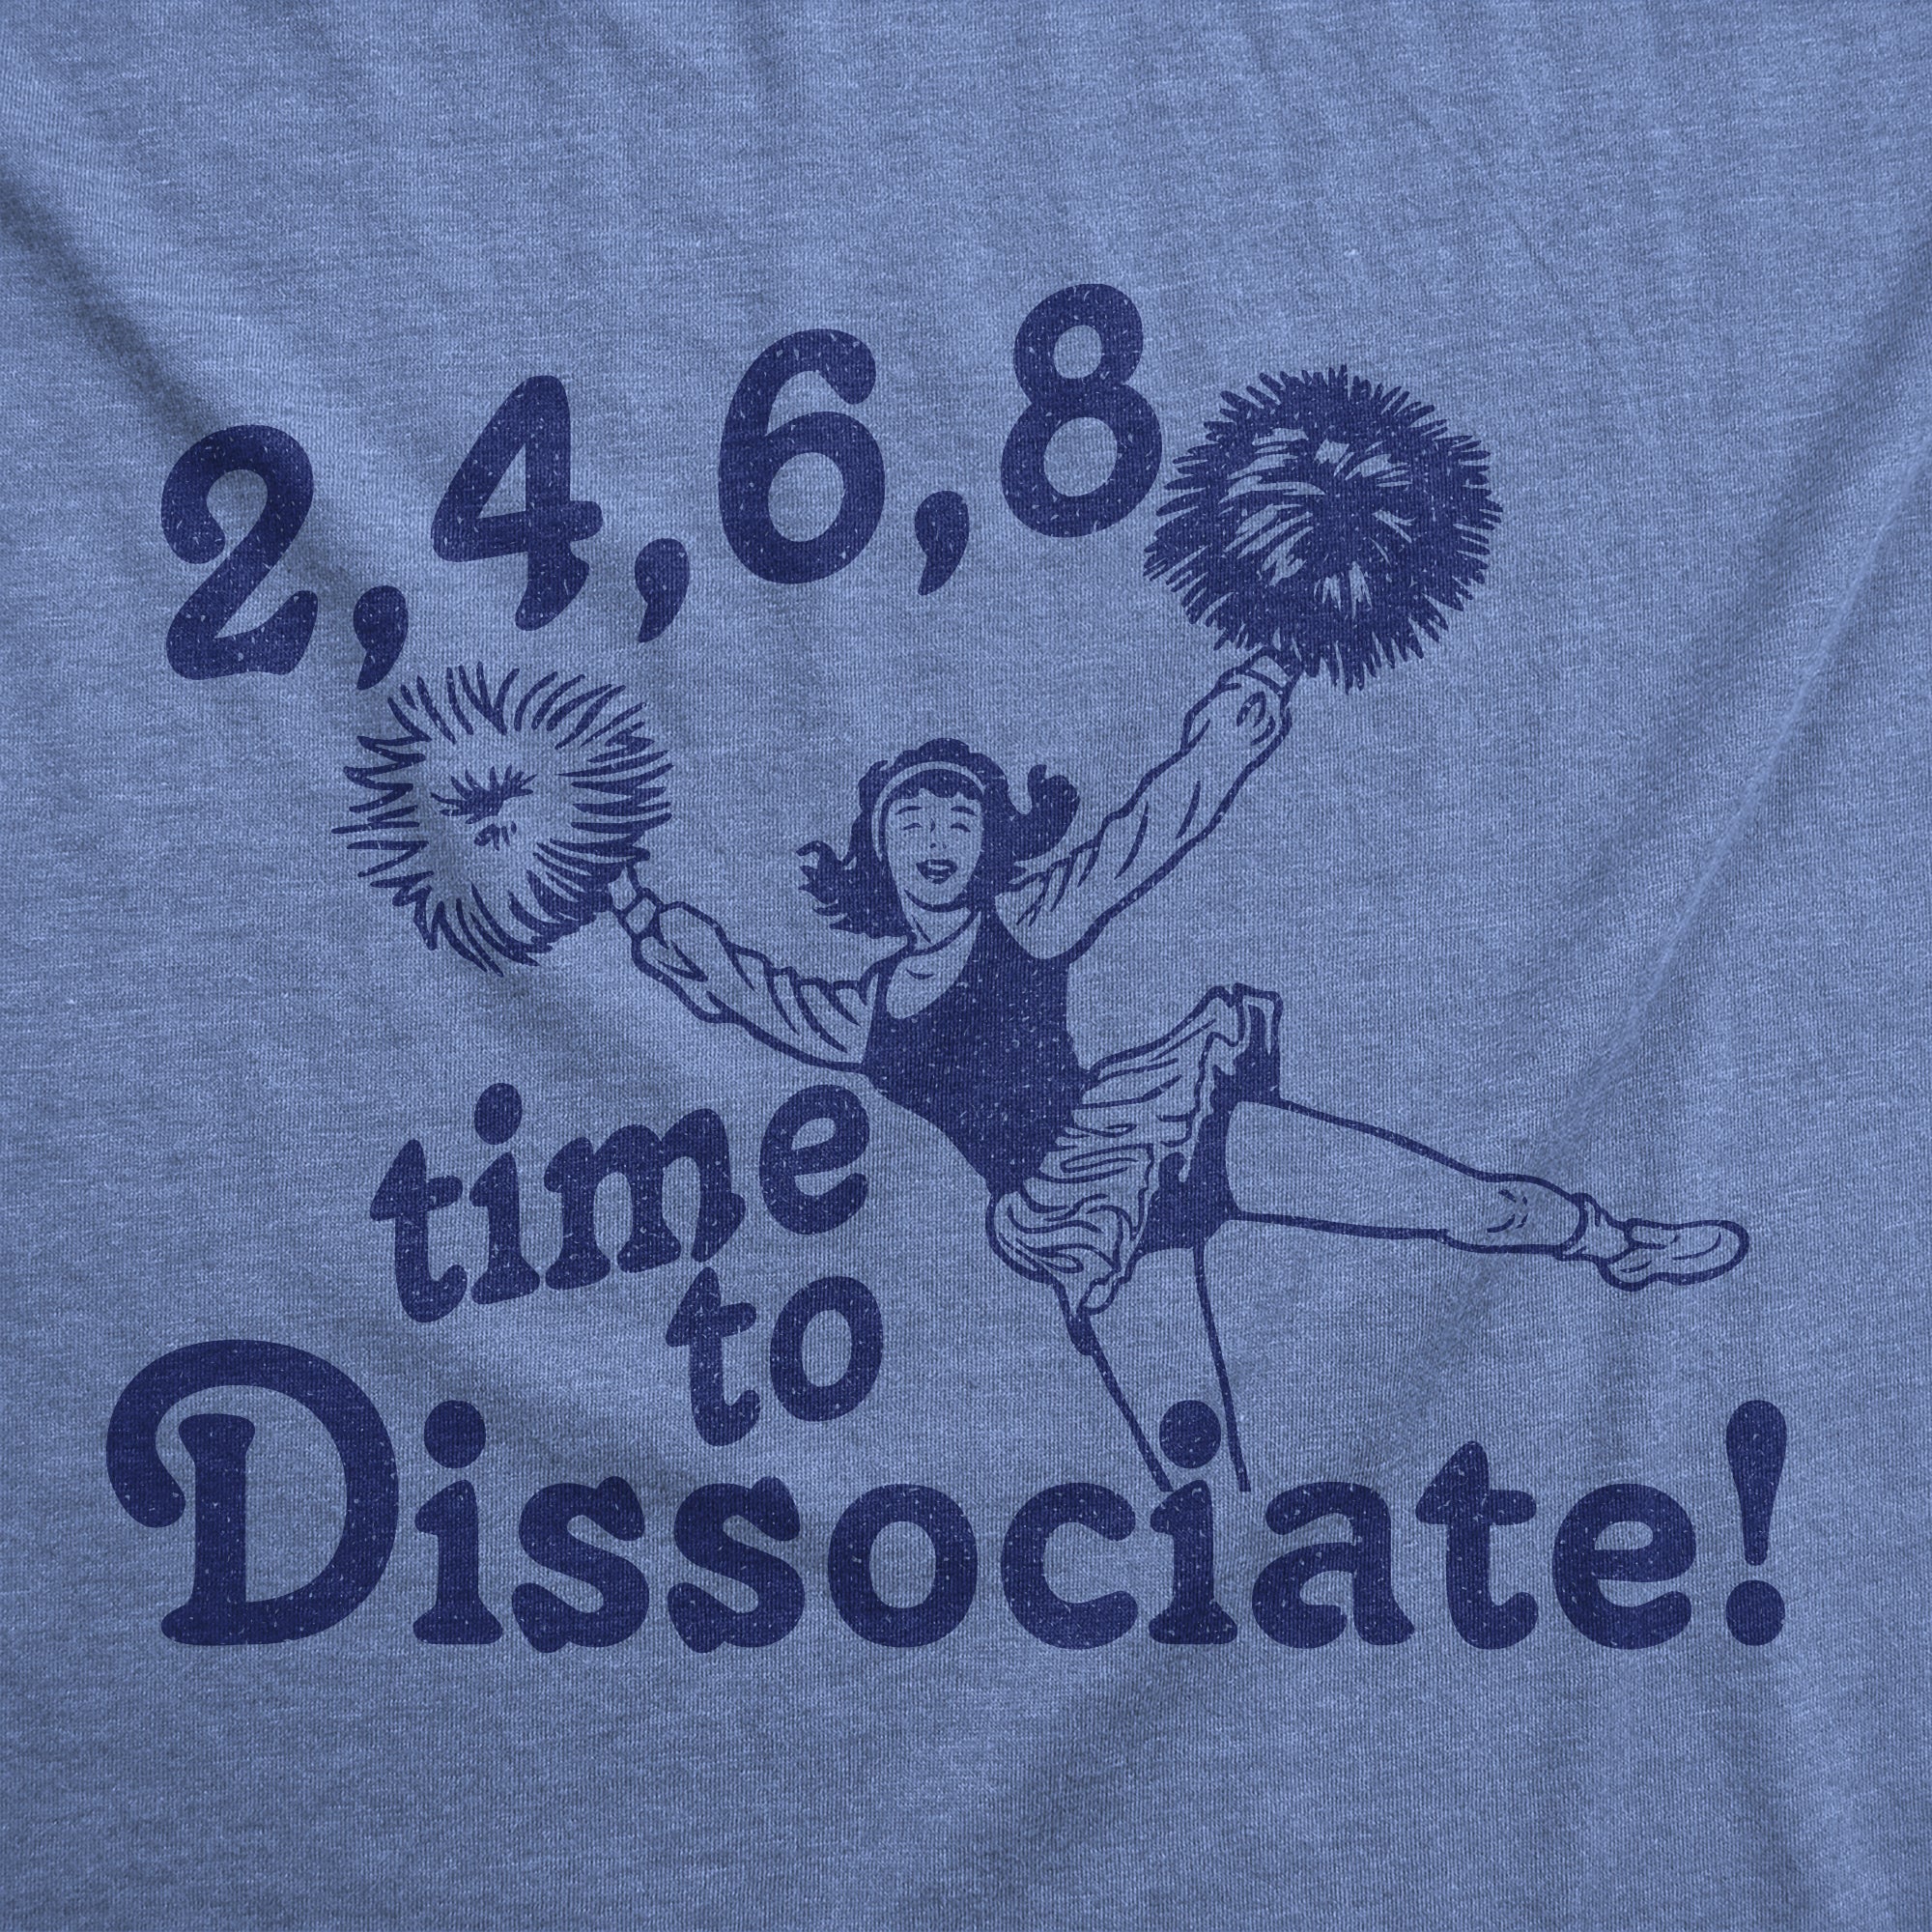 Funny Light Heather Blue - Time To Dissociate 2 4 6 8 Time To Dissociate Womens T Shirt Nerdy Sarcastic Introvert Tee